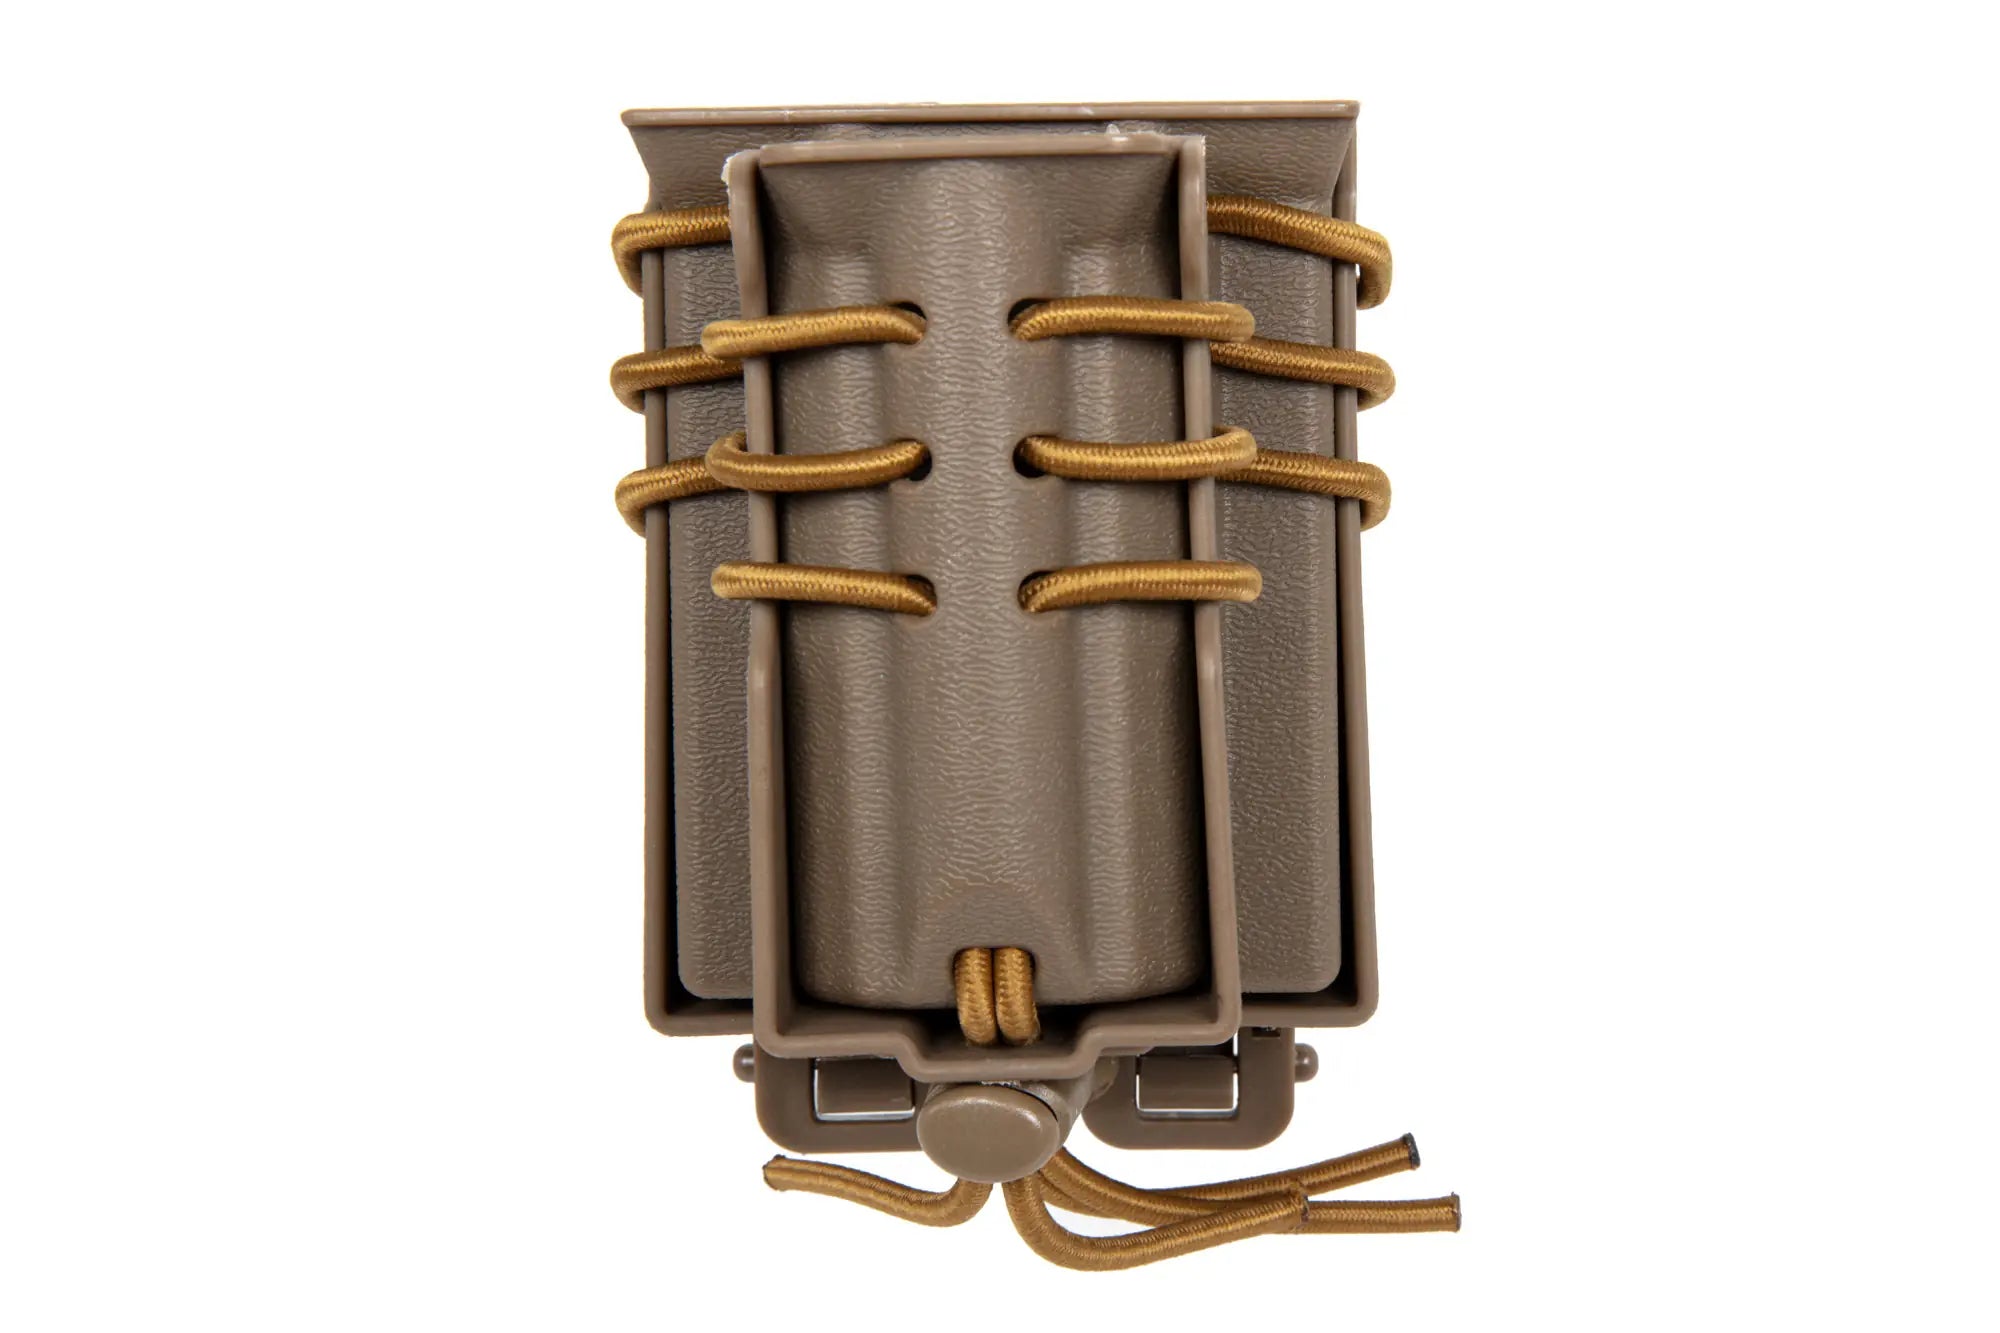 Carrier for 2 M4/M16 and 9mm magazines Wosport Urban Assault Quick Pull Tan-2